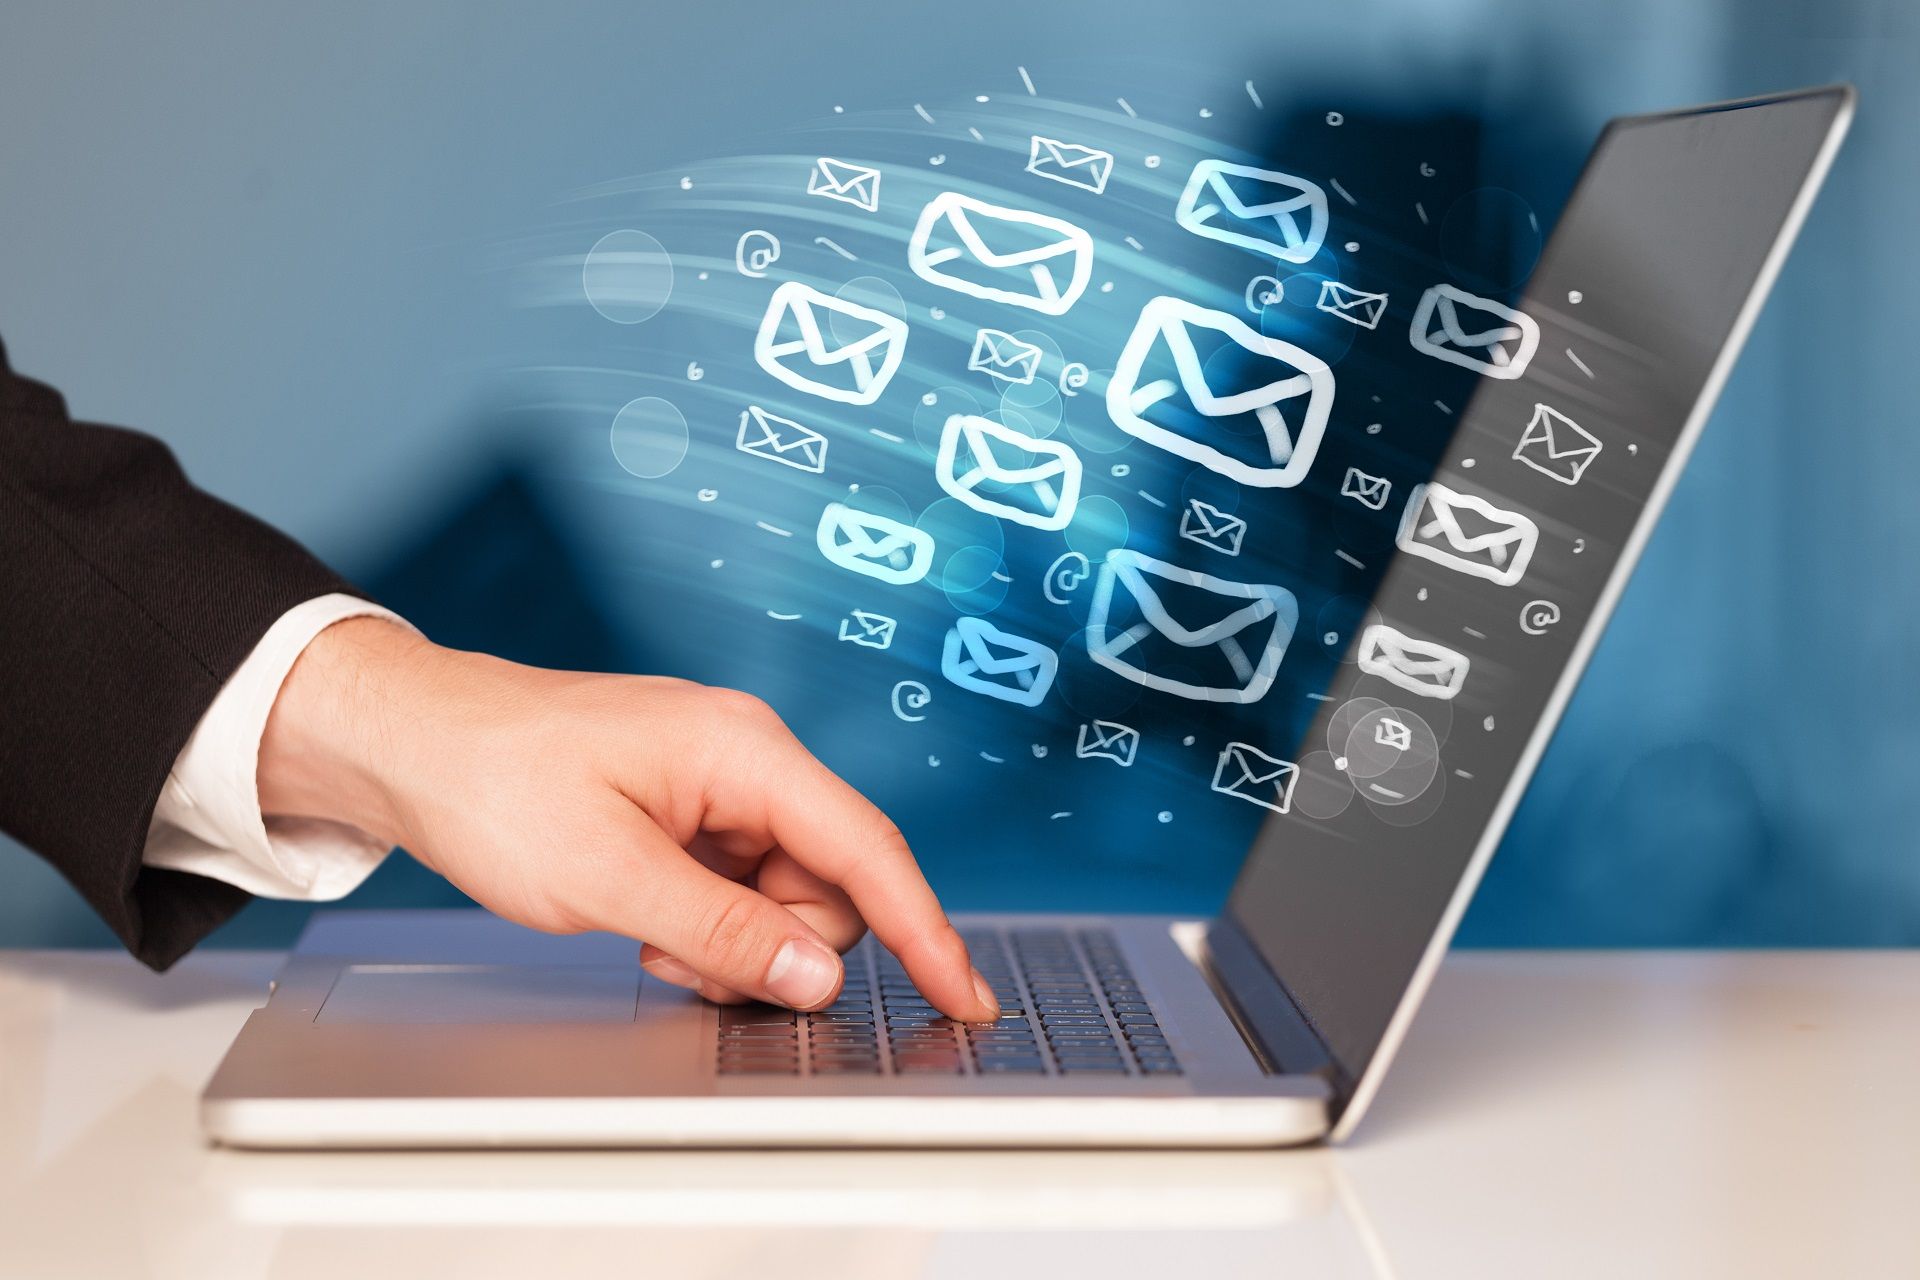 Email Marketing Vs Social Media Marketing - What Is The Best Approach?